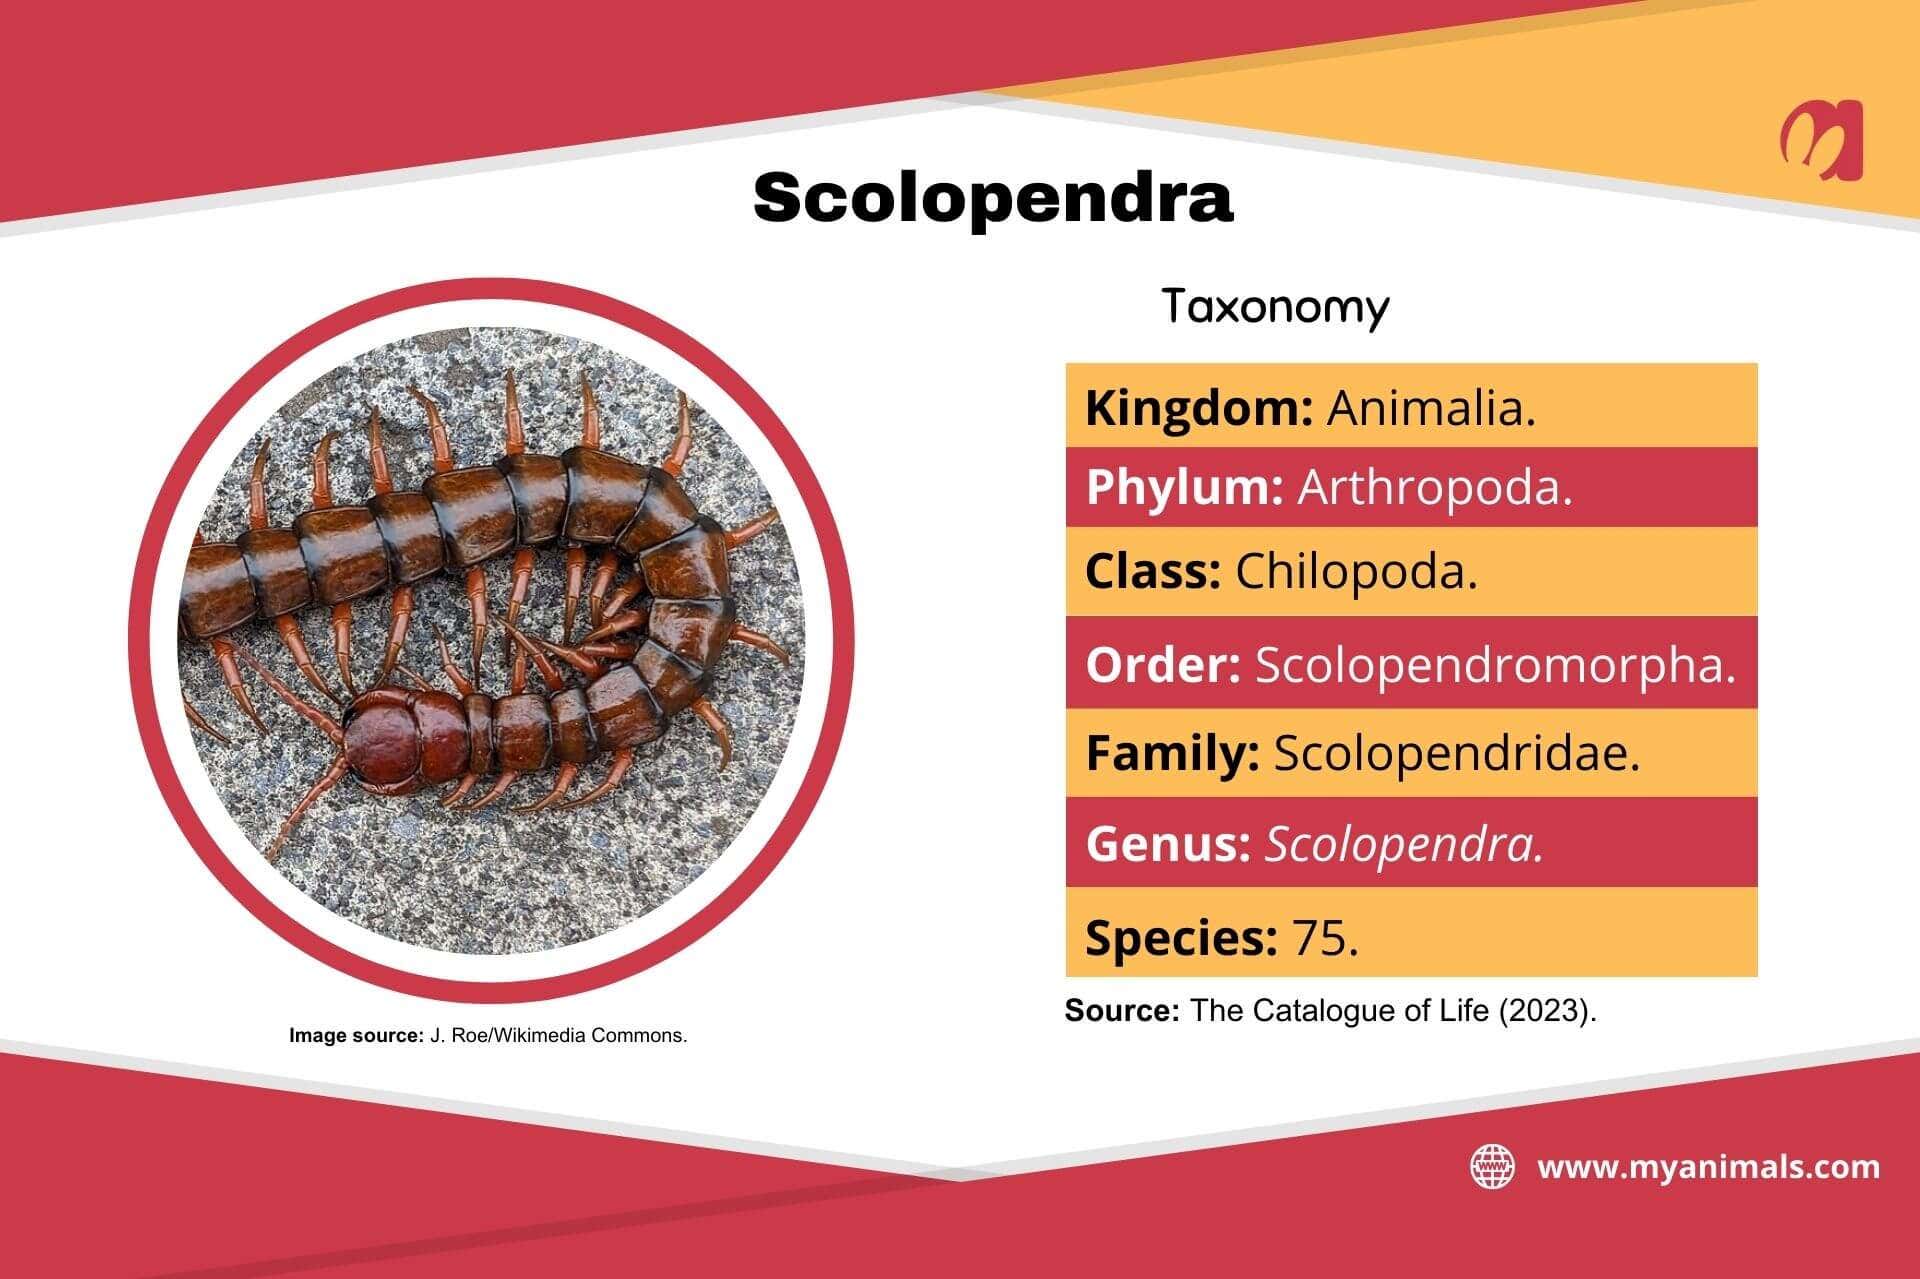 Information on scolopendra.